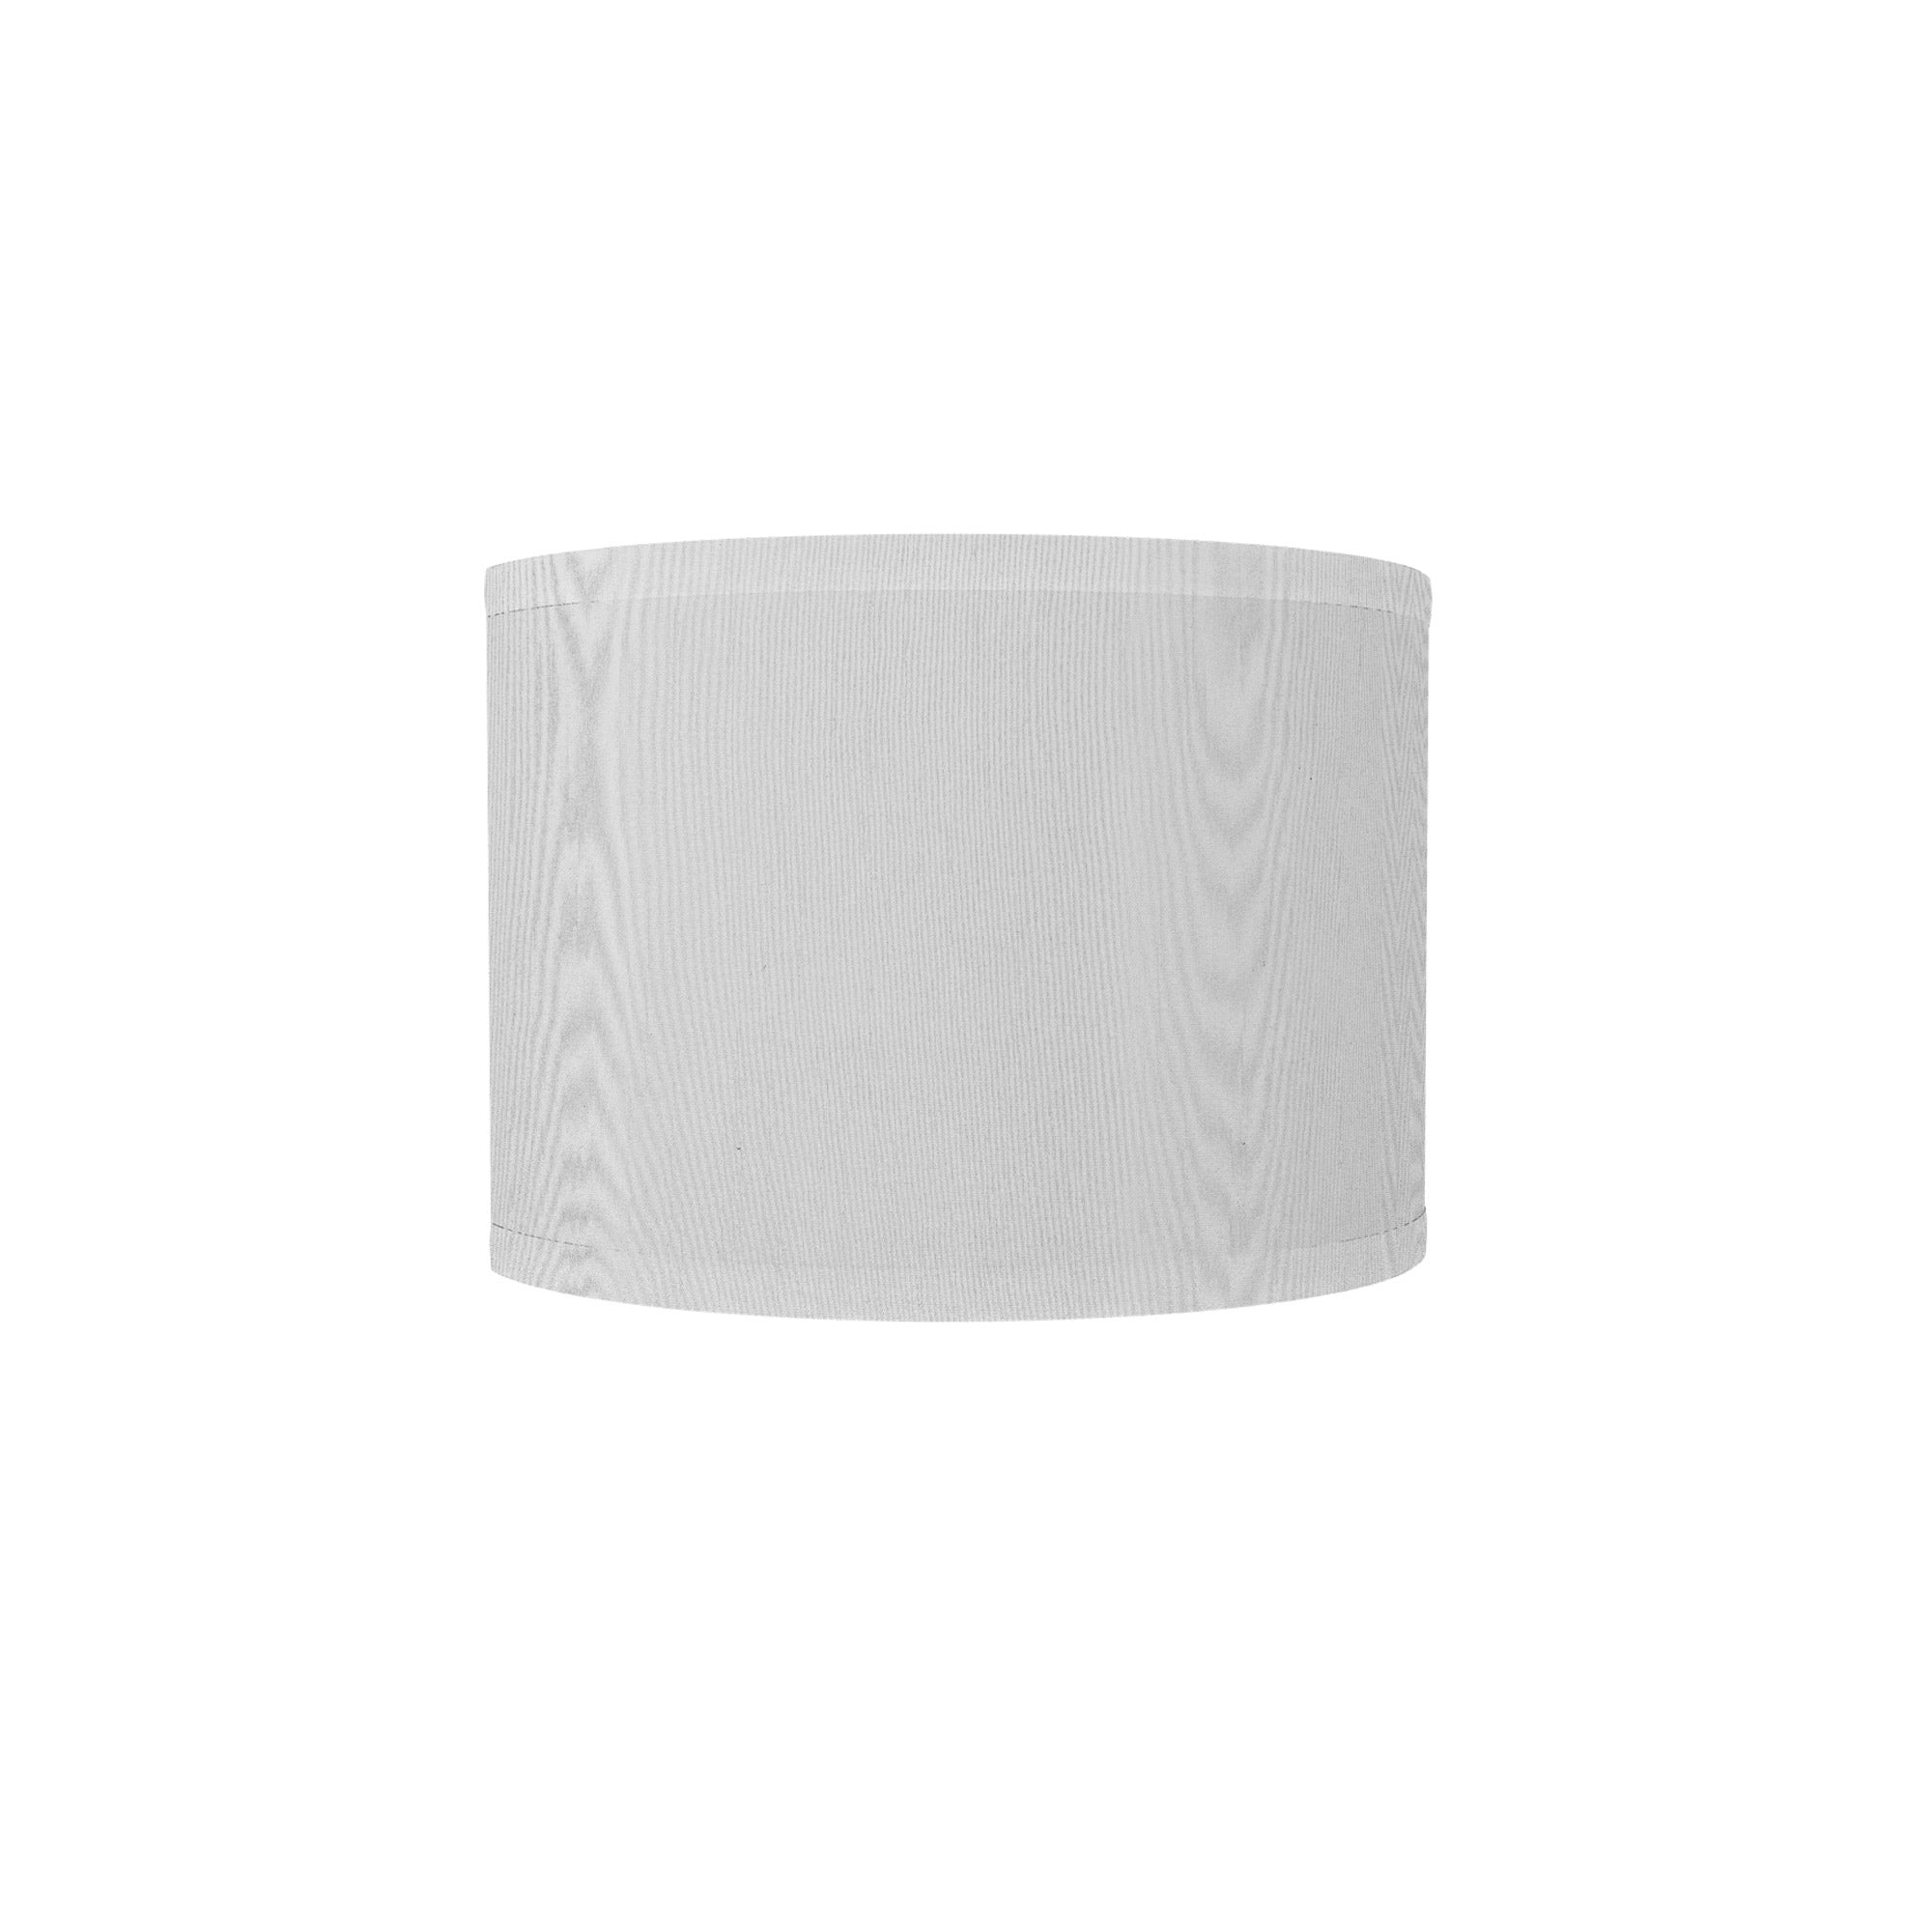 The Bryce Wall Sconce from Seascape Fixtures with a silk shade in white color.